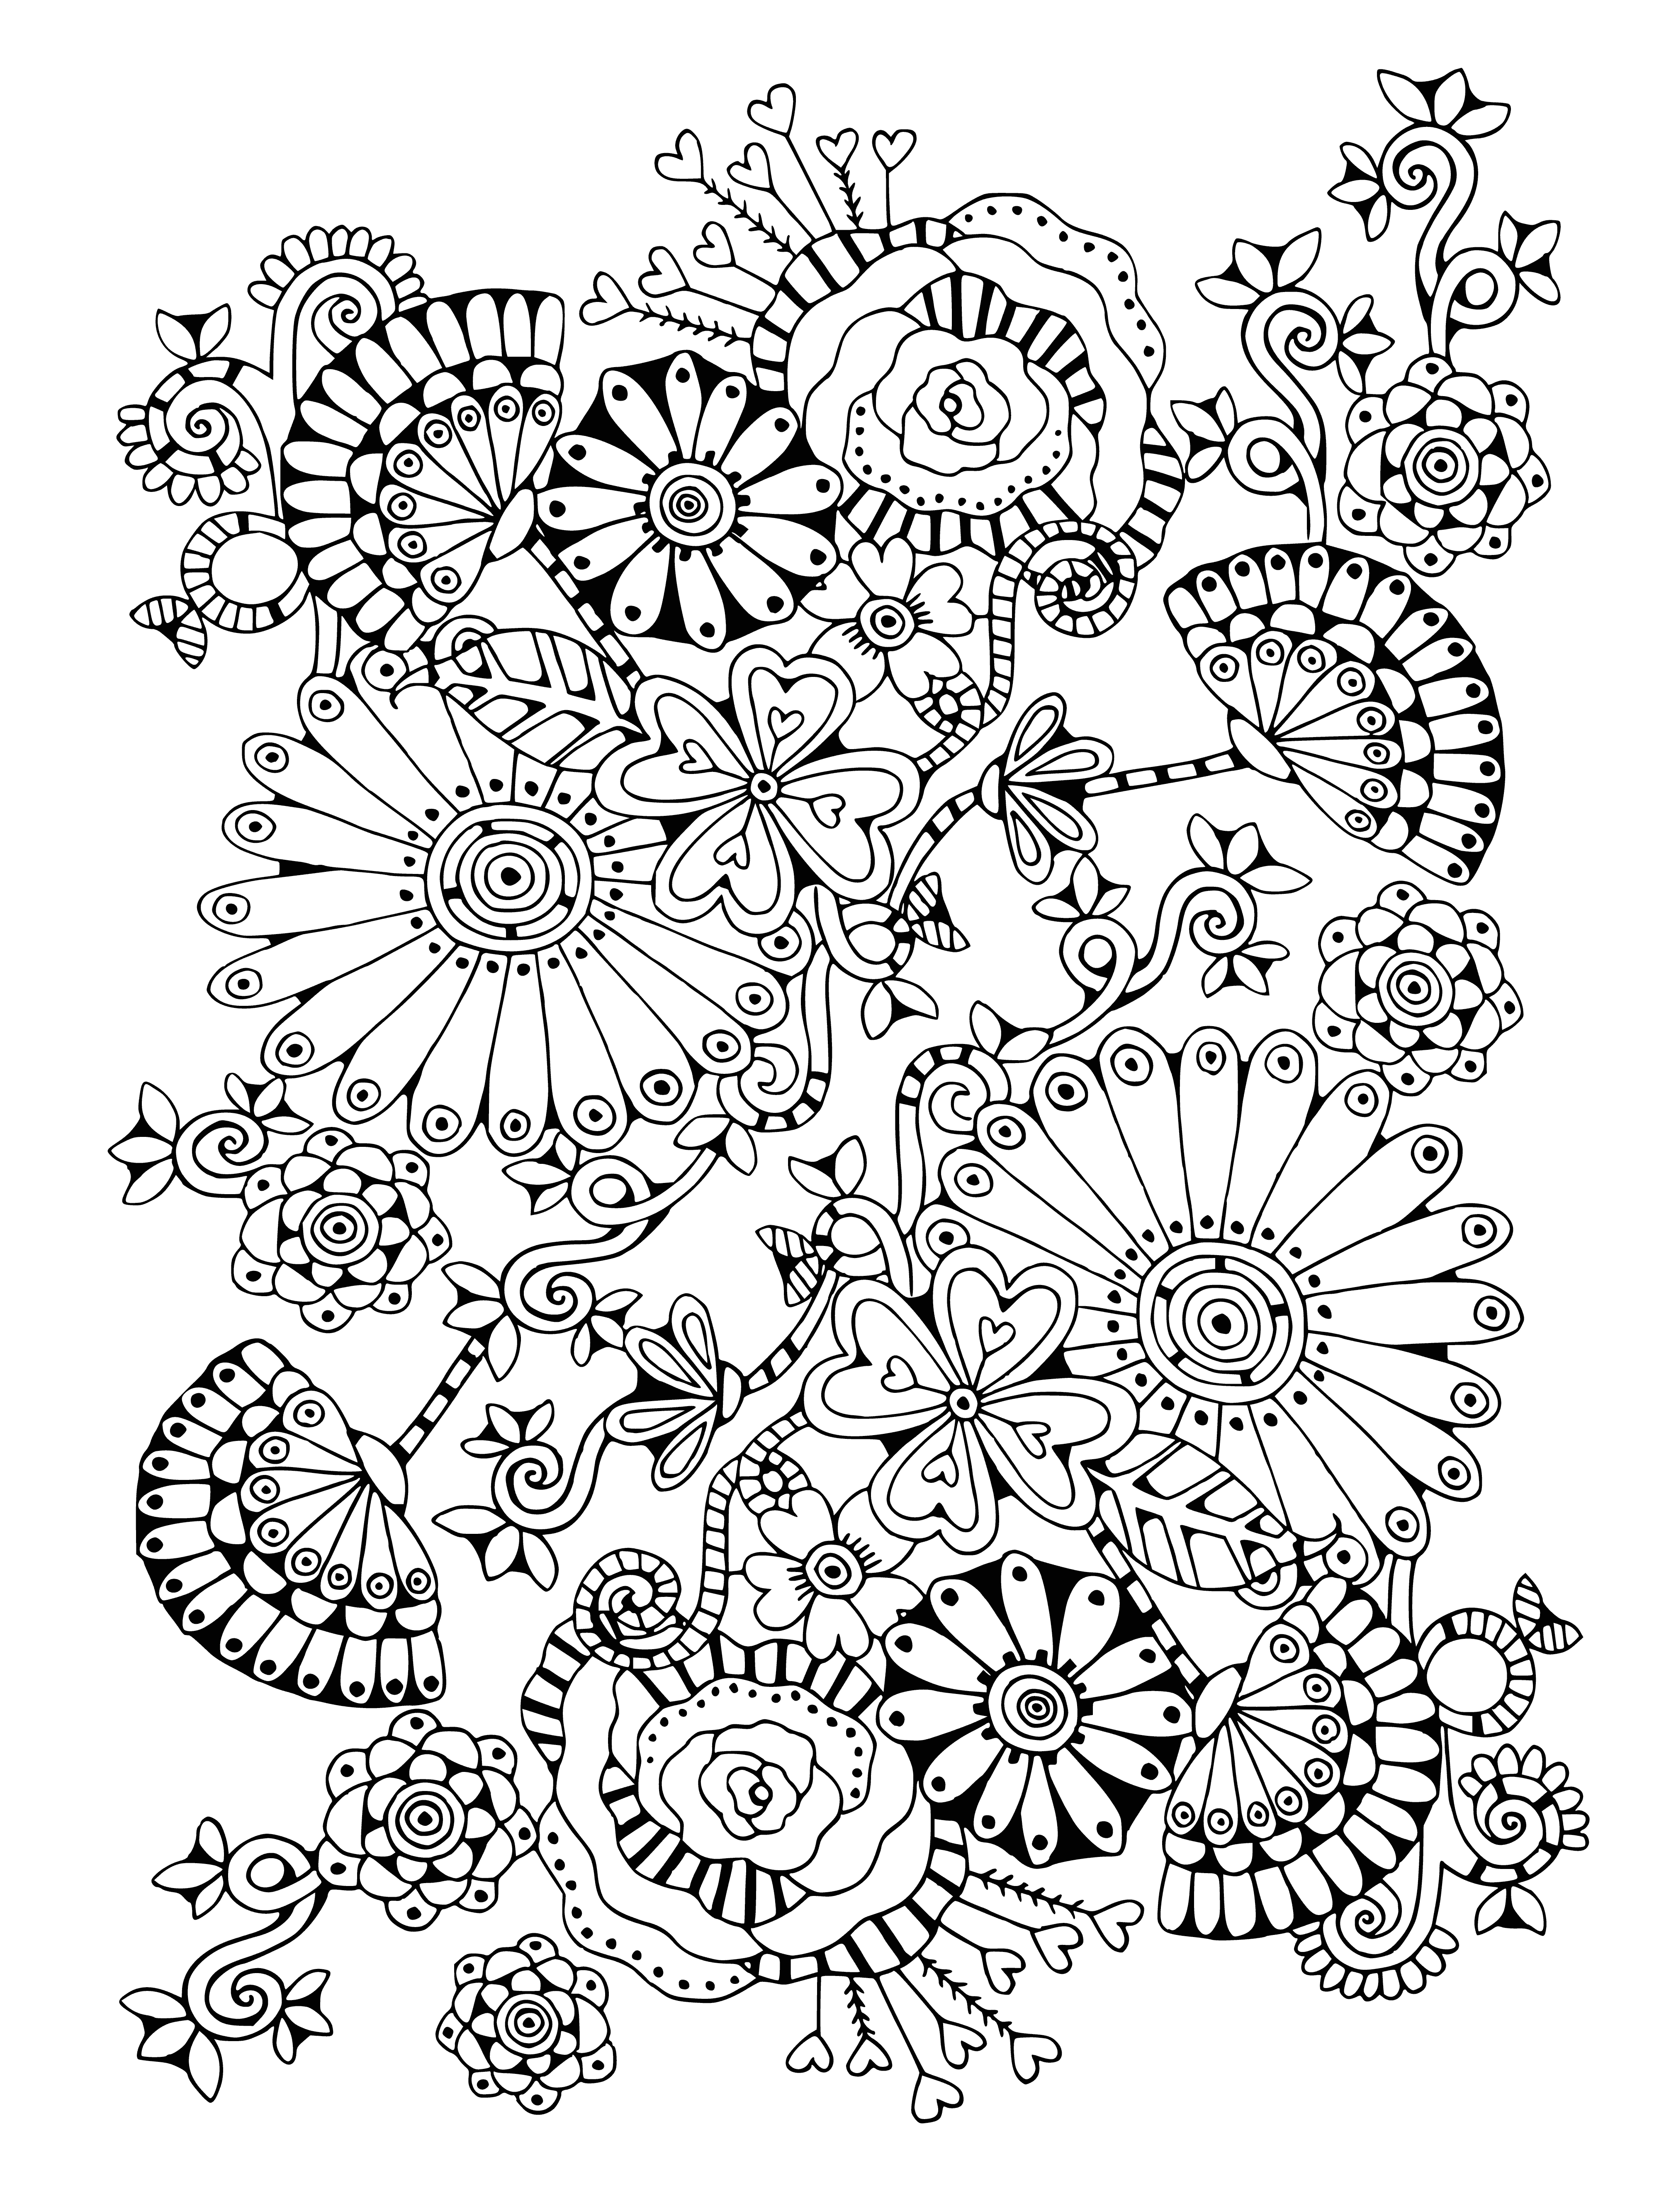 coloring page: A coloring page with lots of flowers, leaves and colors! It has small delicate flowers mixed with large showy ones. A nice challenge with lots of detail to keep you occupied. #coloring #flowers #colorful